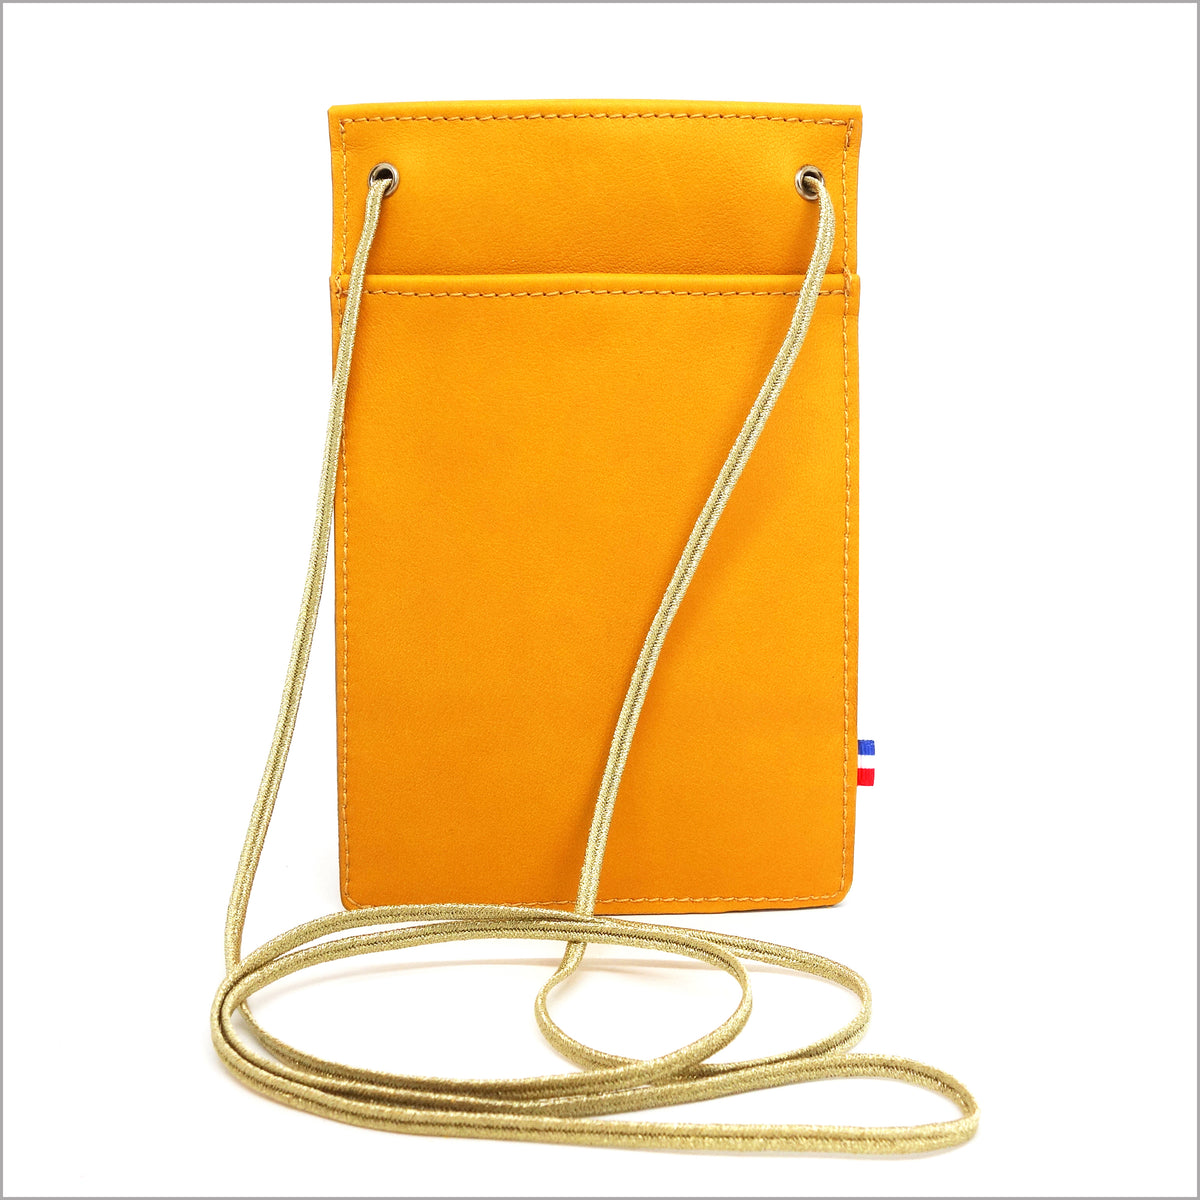 Telephone pouch in golden yellow leather with adjustable shoulder strap